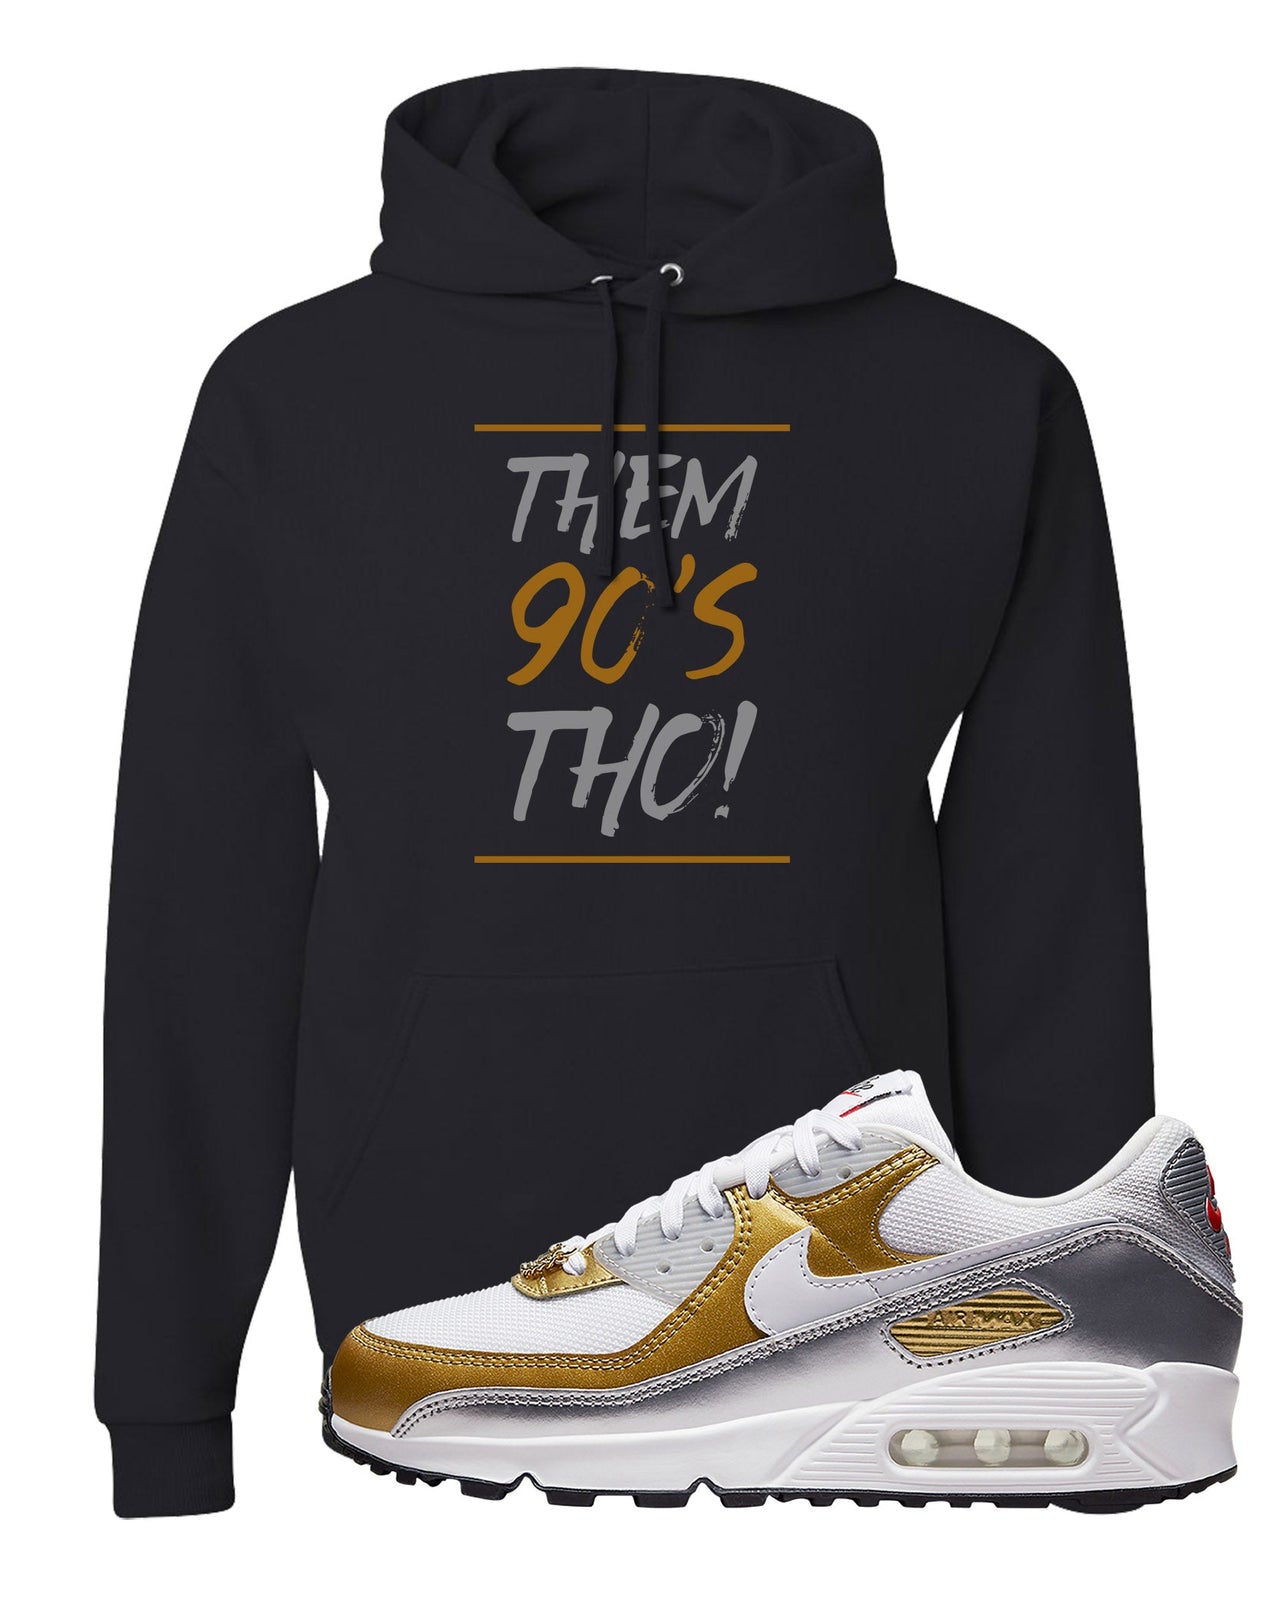 Gold Silver 90s Hoodie | Them 90's Tho, Black